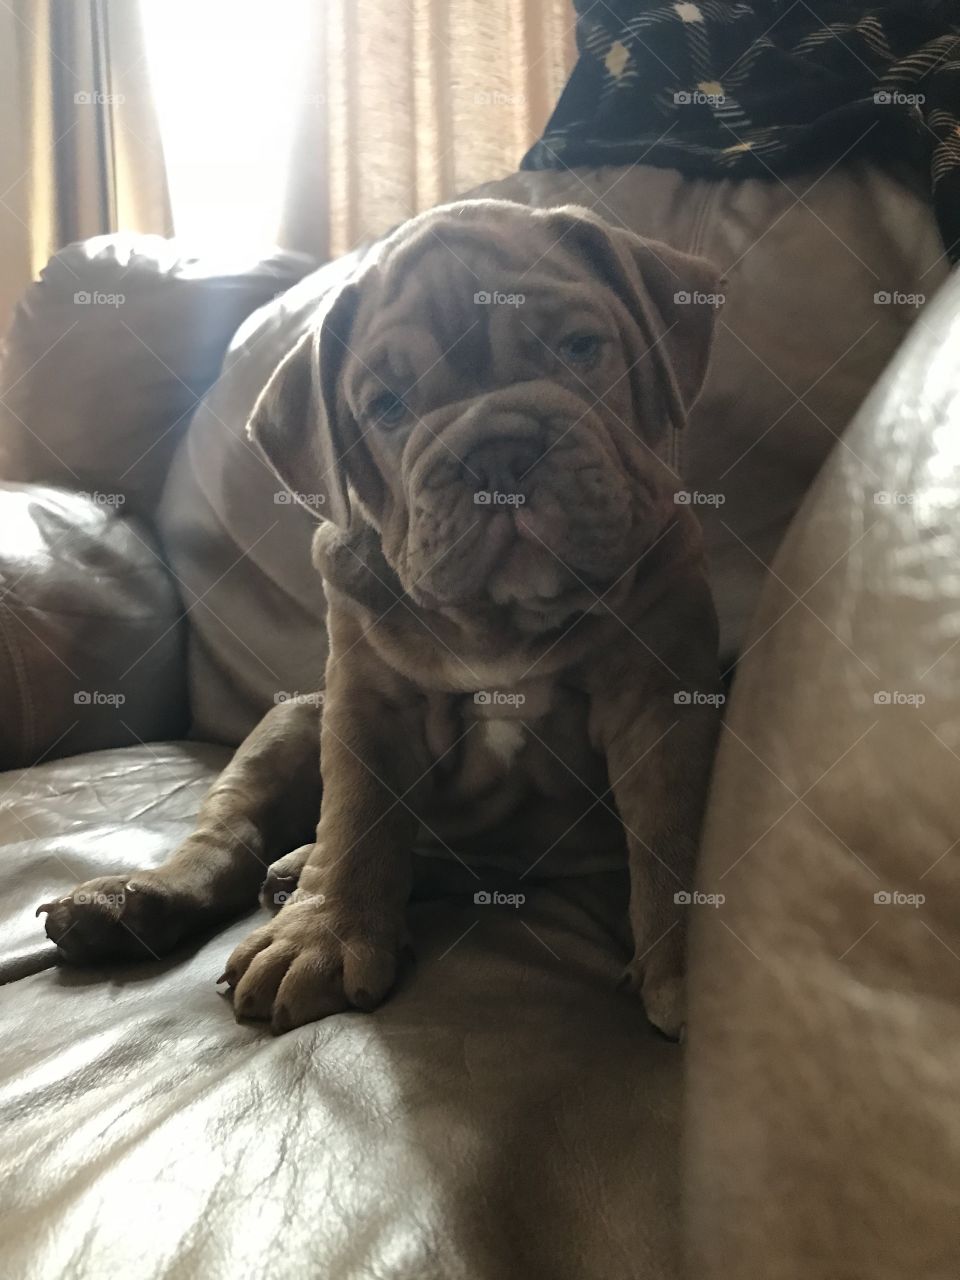 The sweetest little wrinkled bulldog puppy staring straight into the camera. 